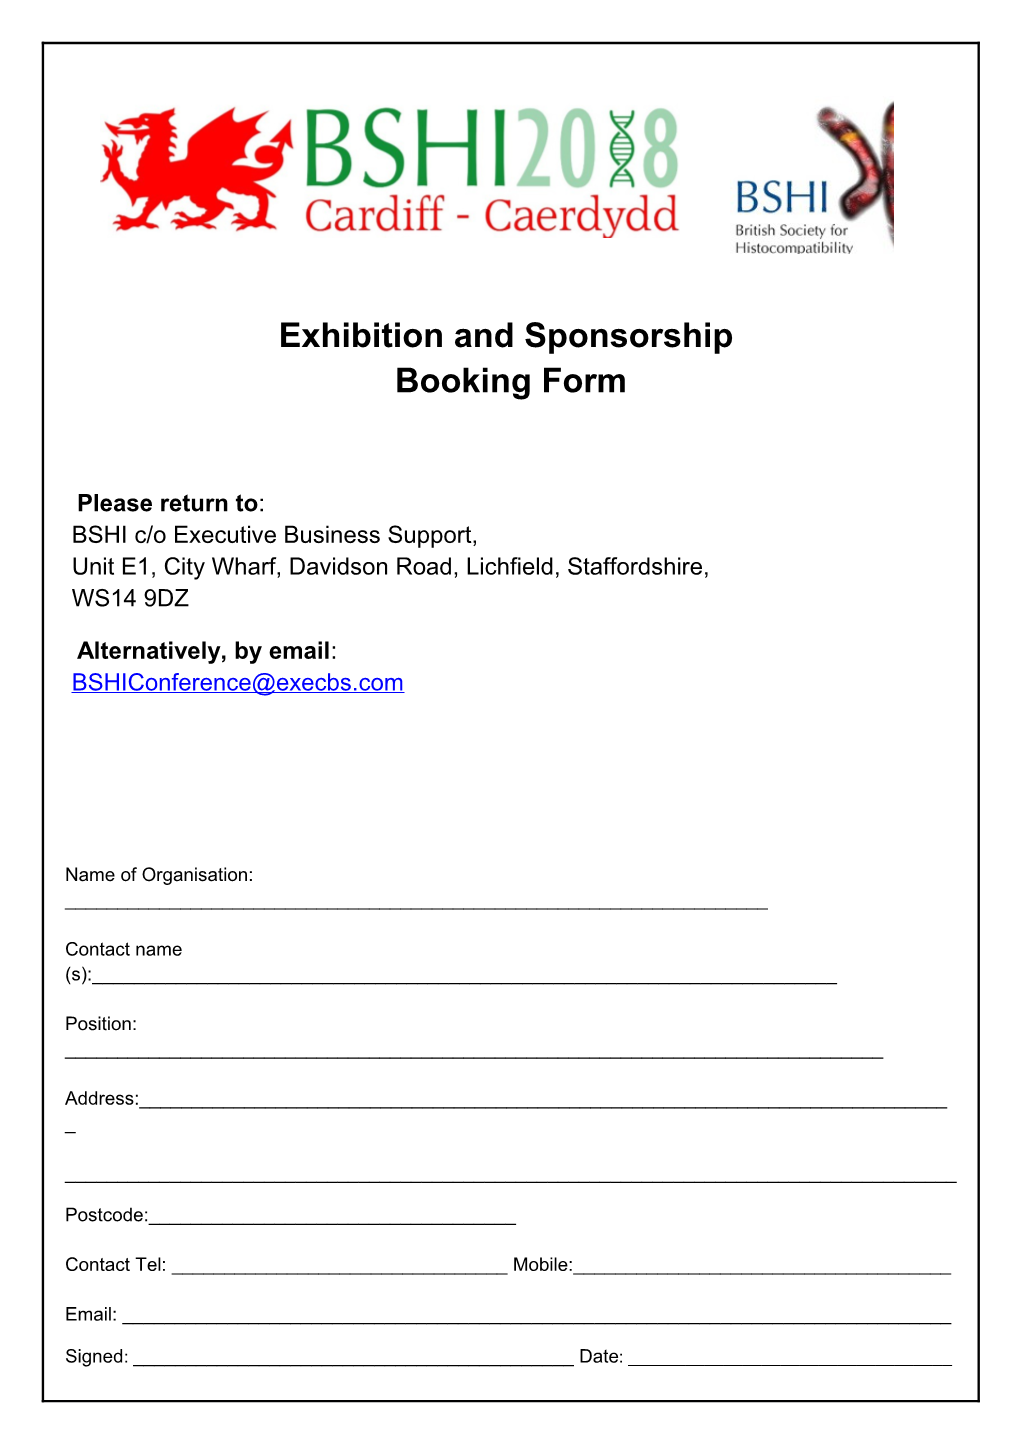 Exhibition and Sponsorship Booking Form